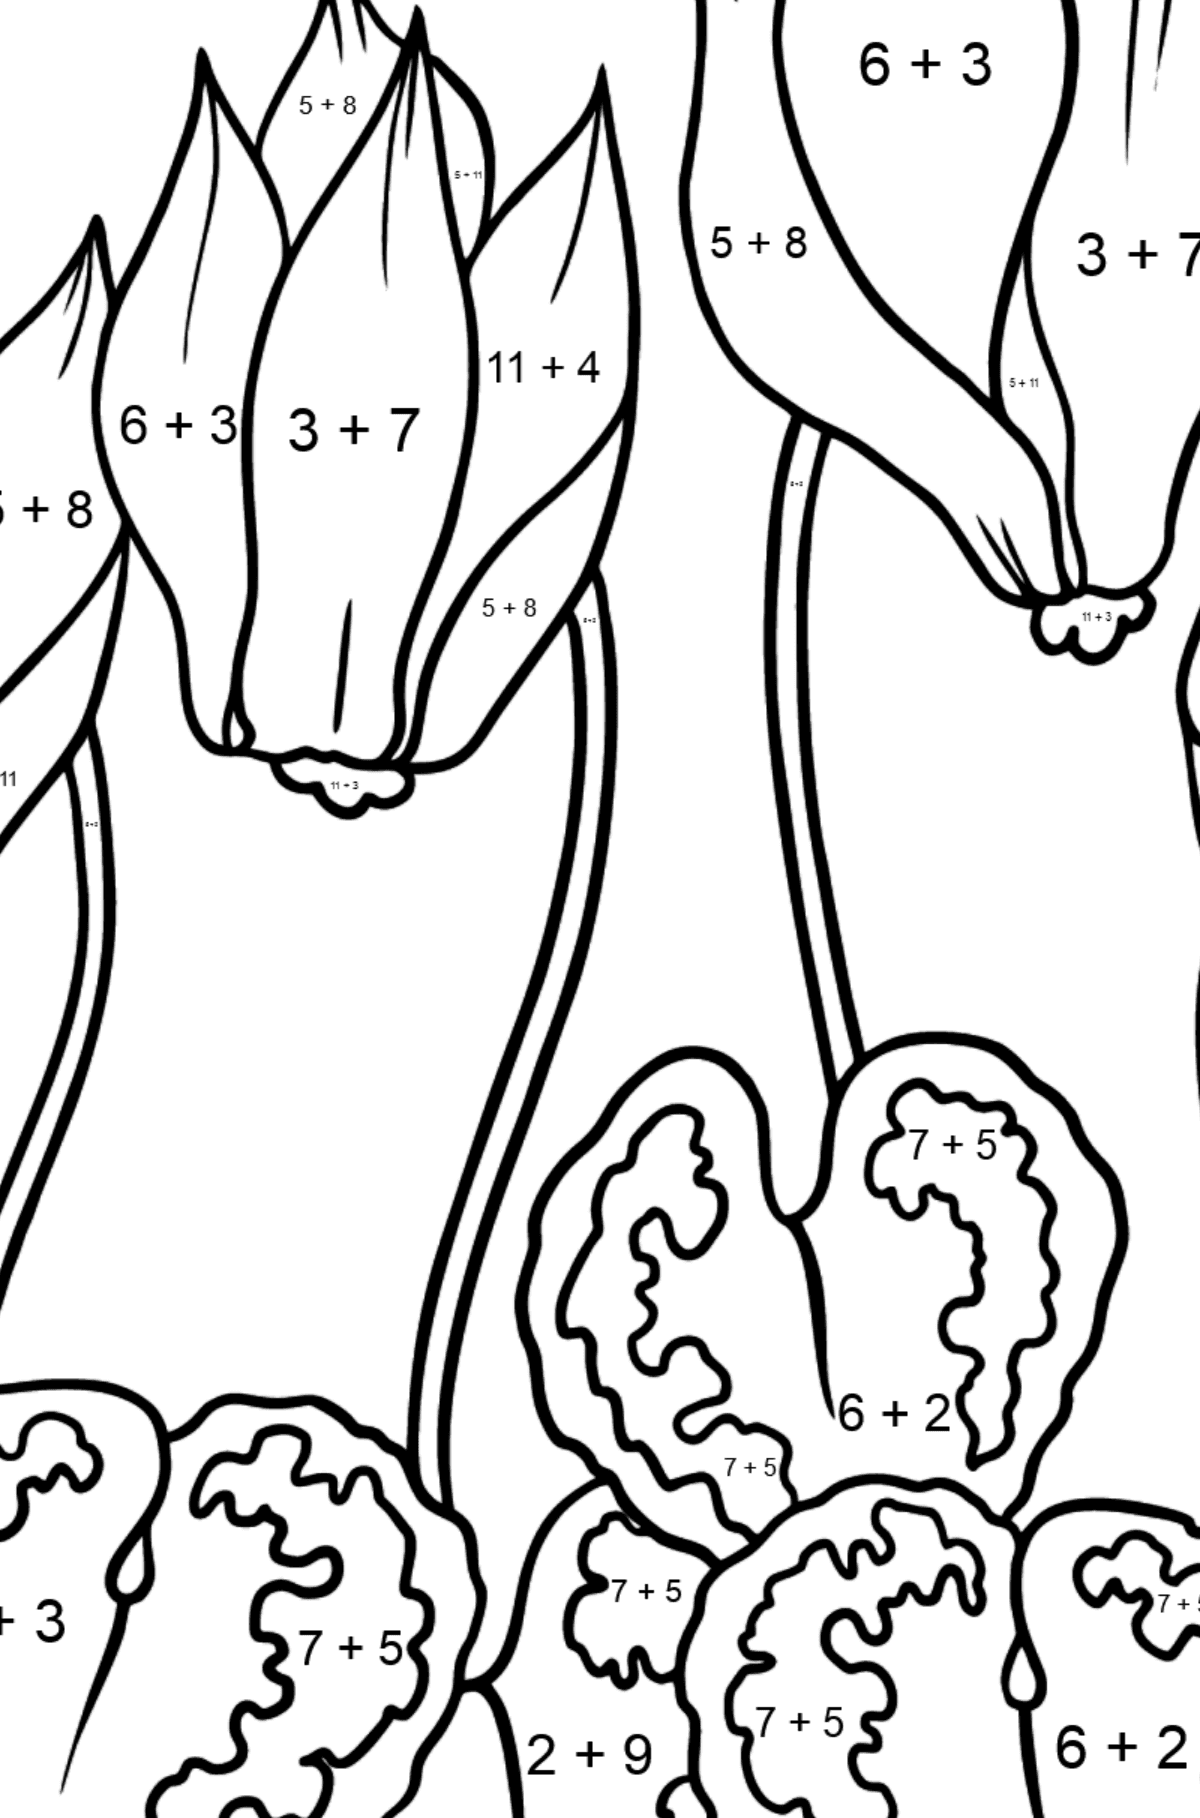 Red Cyclamen Coloring Page - Math Coloring - Addition for Kids